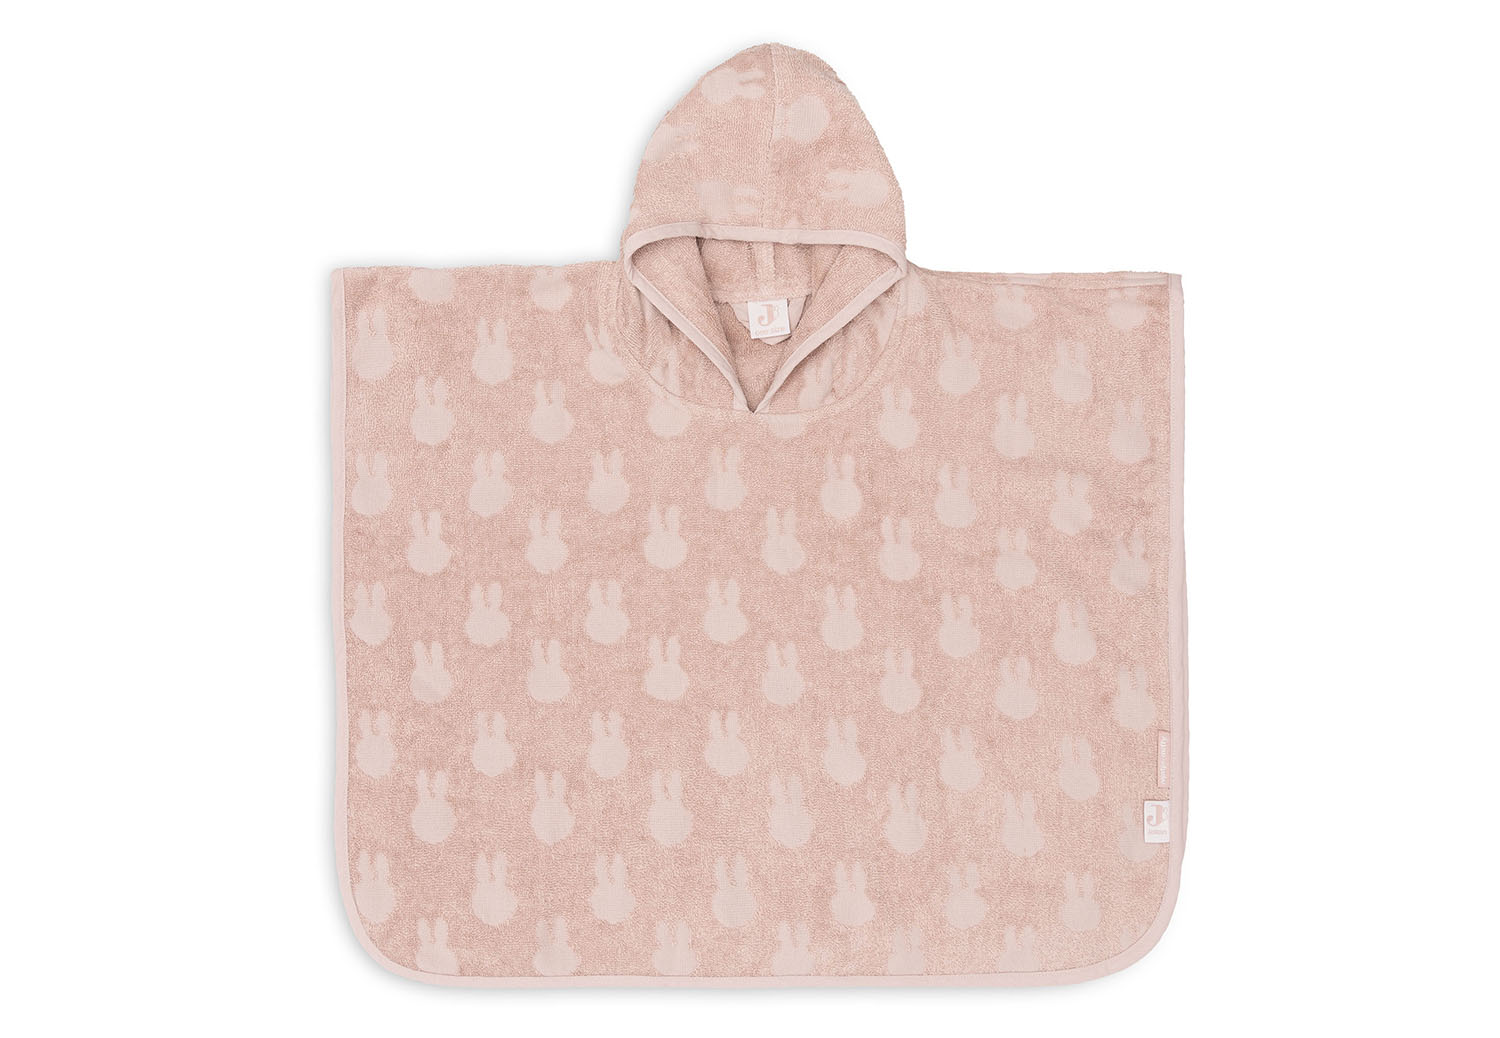 Badeponcho / Strandponcho Miffy Frottee rosa